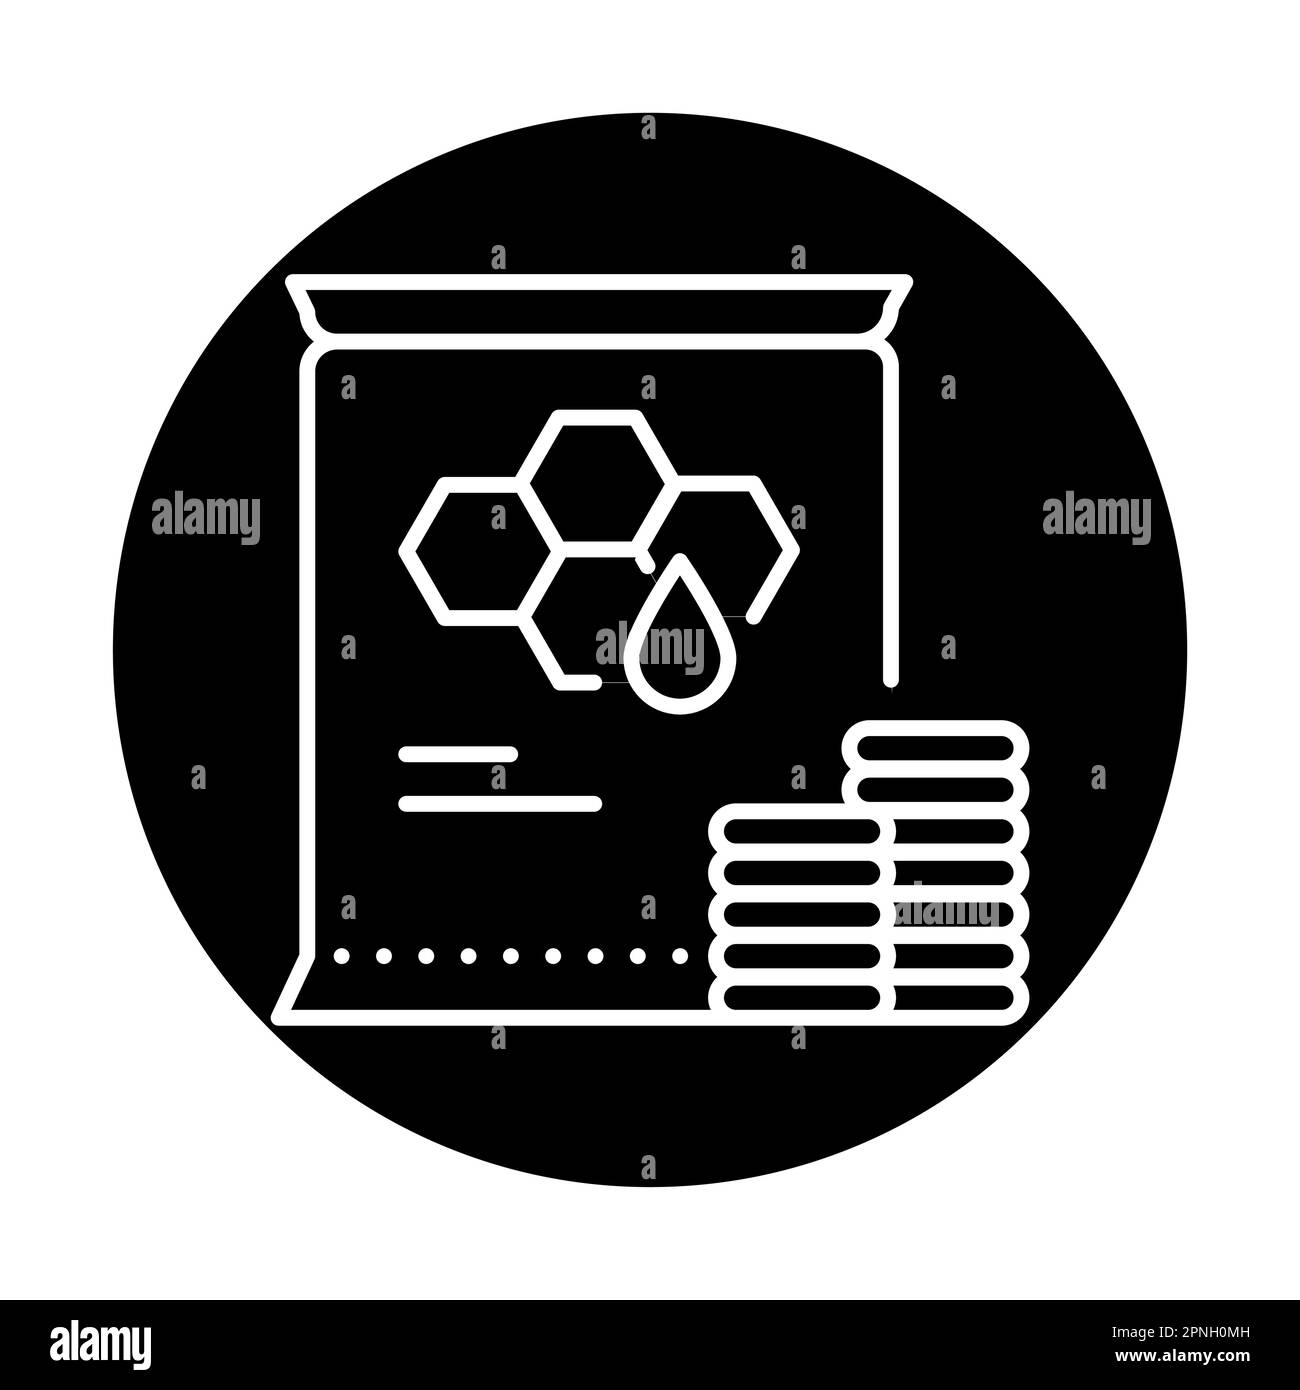 Wax discs bees extra color line icon. Cosmetic product. Pictogram for web page, mobile app, promo. Stock Vector